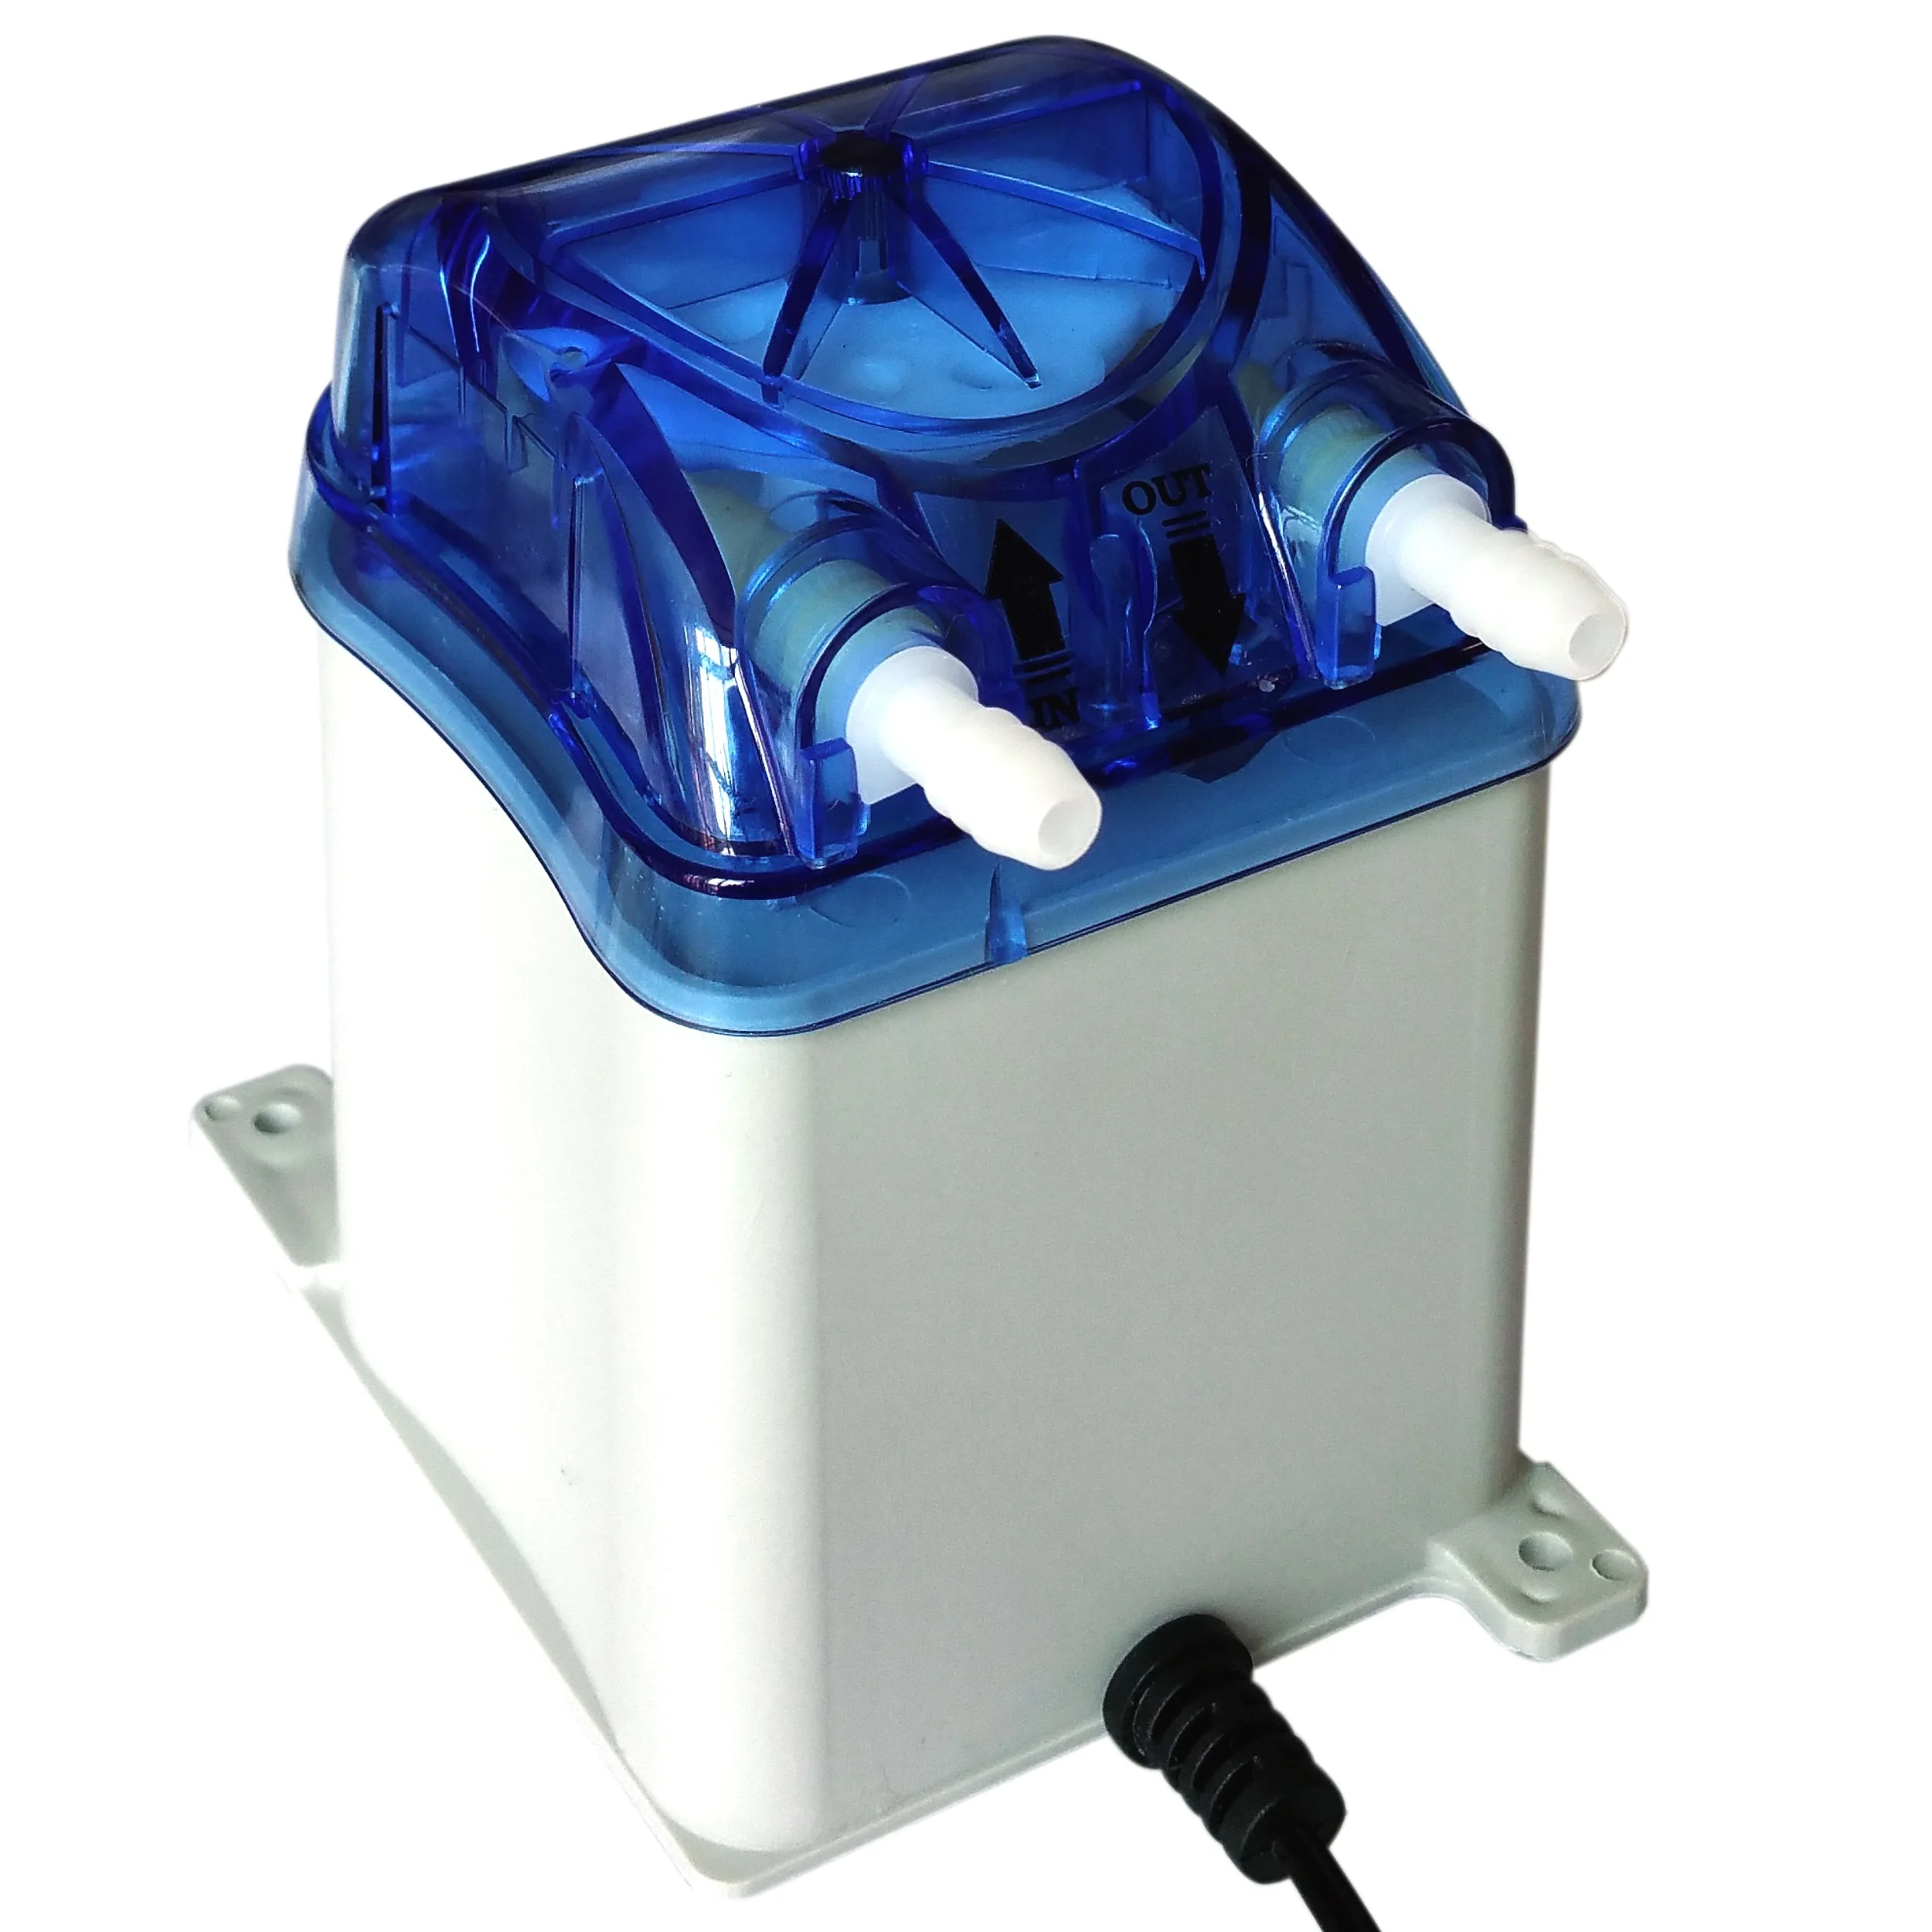 

500ml/min, 2 Rollers, Honlite 24V Peristaltic Pump with Exchangeable Pump Head and PharMed BPT Peristaltic Tube